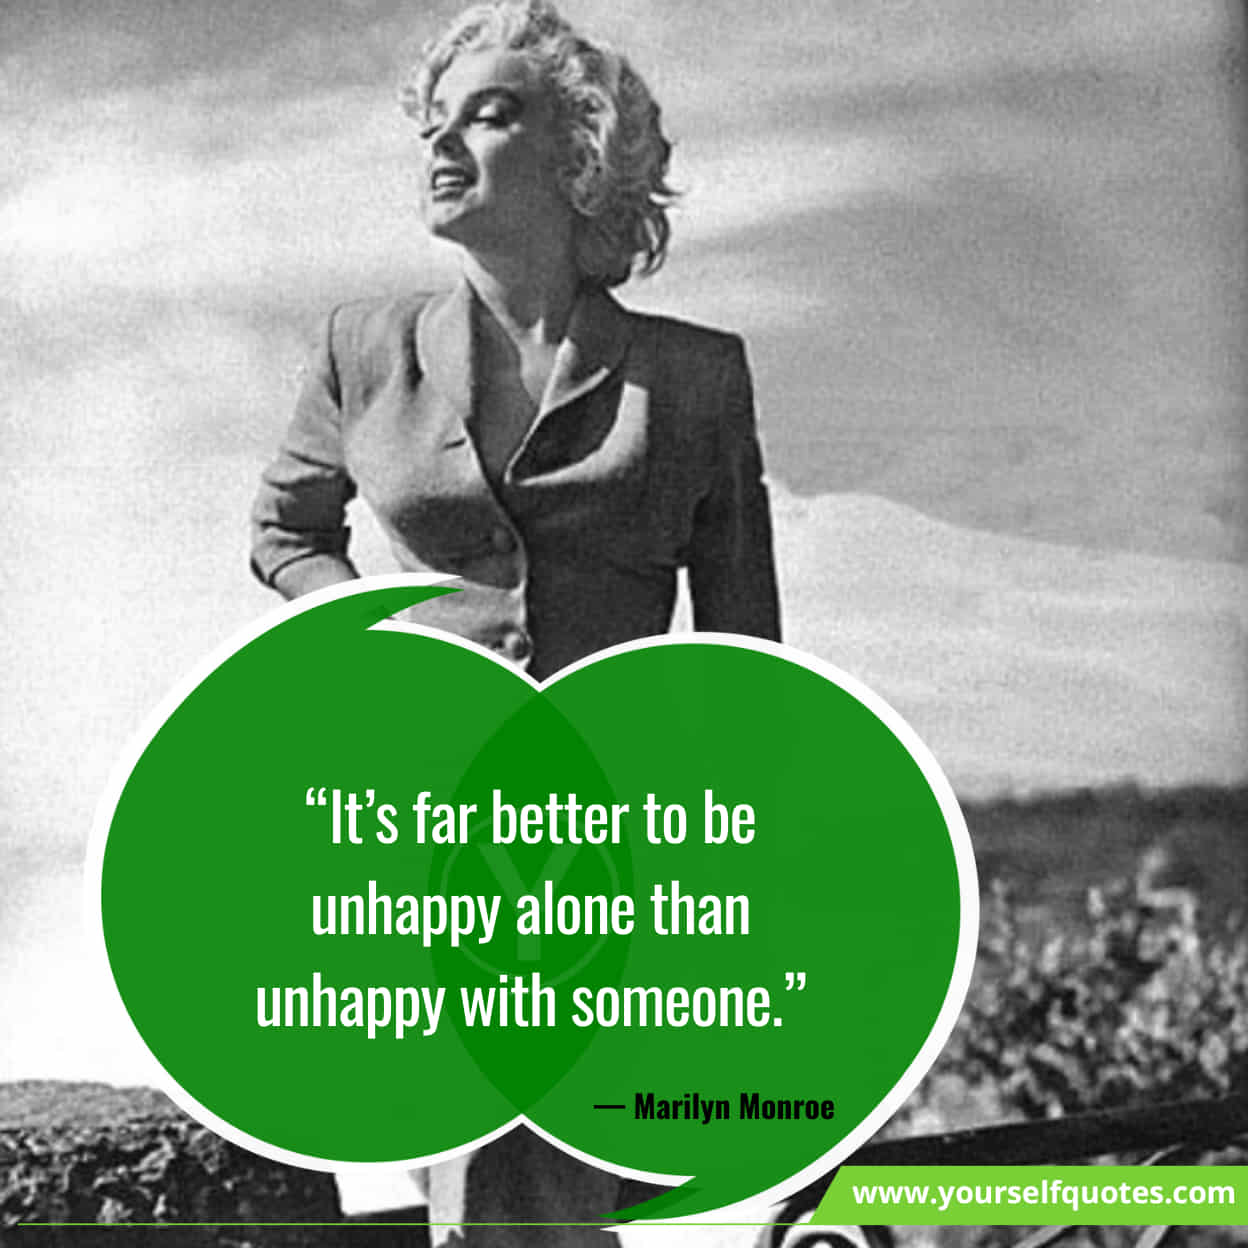 Motivational Marilyn Monroe Quotes On Happiness